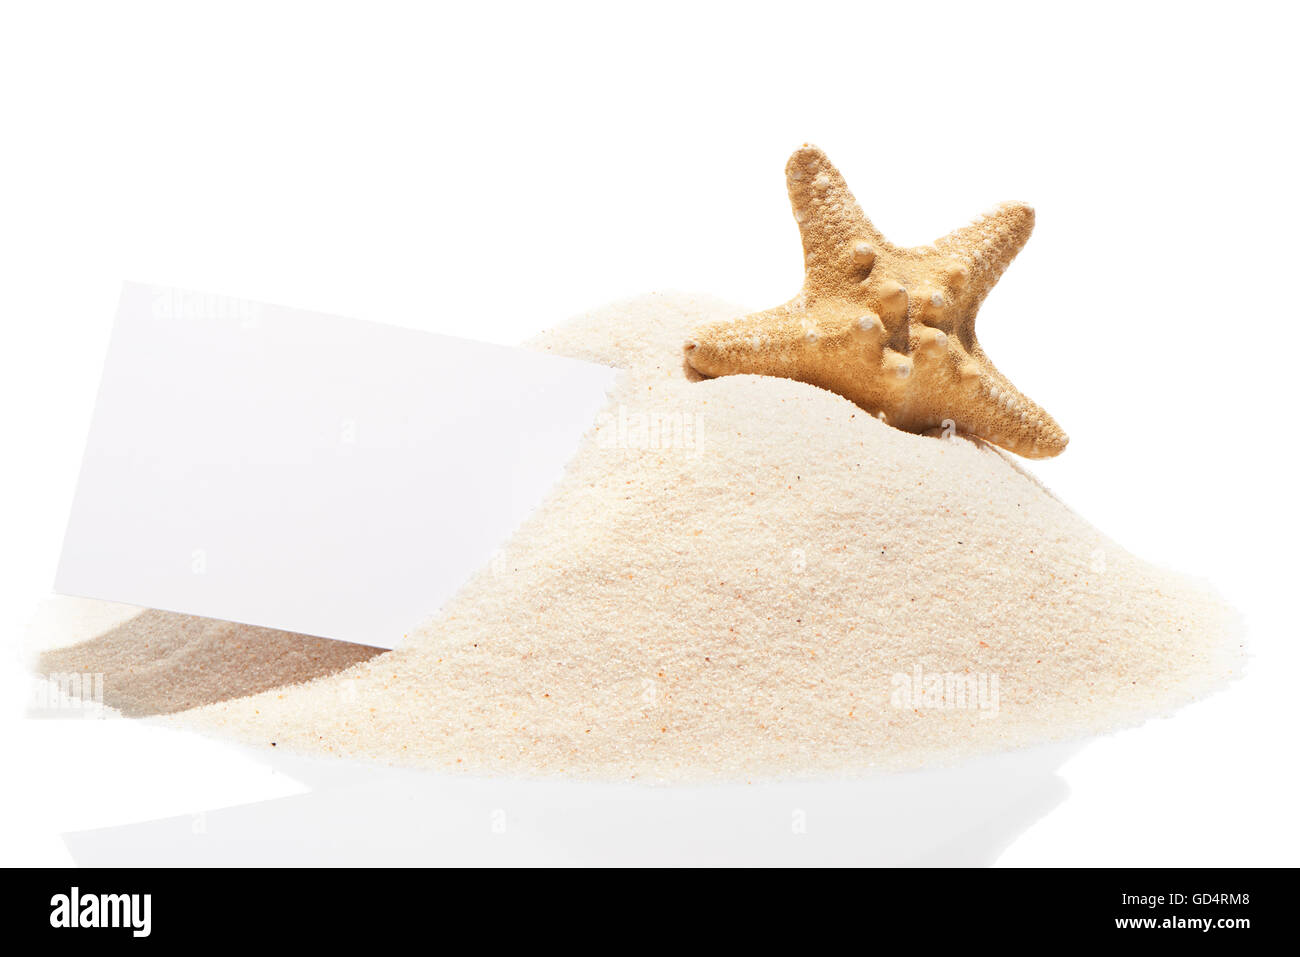 Blank white visit card with starfish on pile of beach sand, isolated on white background Stock Photo